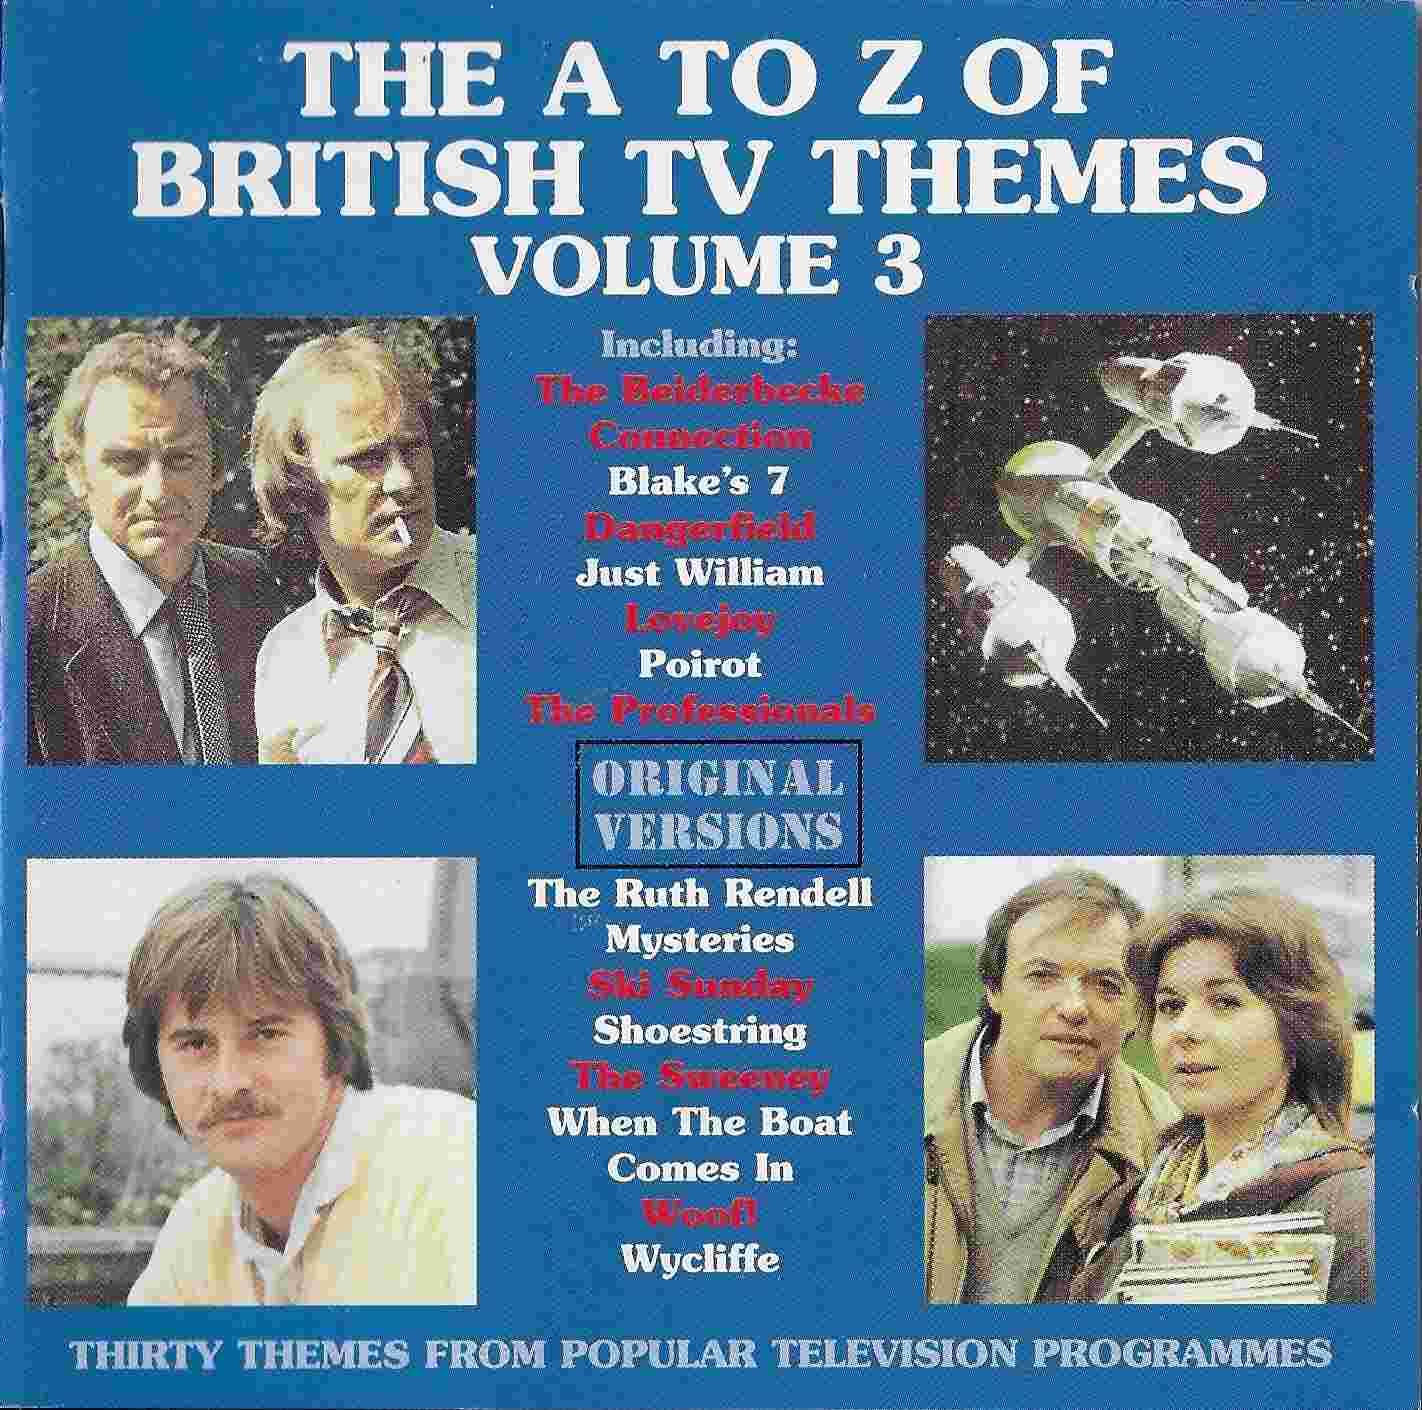 Picture of The a to z of British TV themes - Volume 3 by artist Various from ITV, Channel 4 and Channel 5 cds library